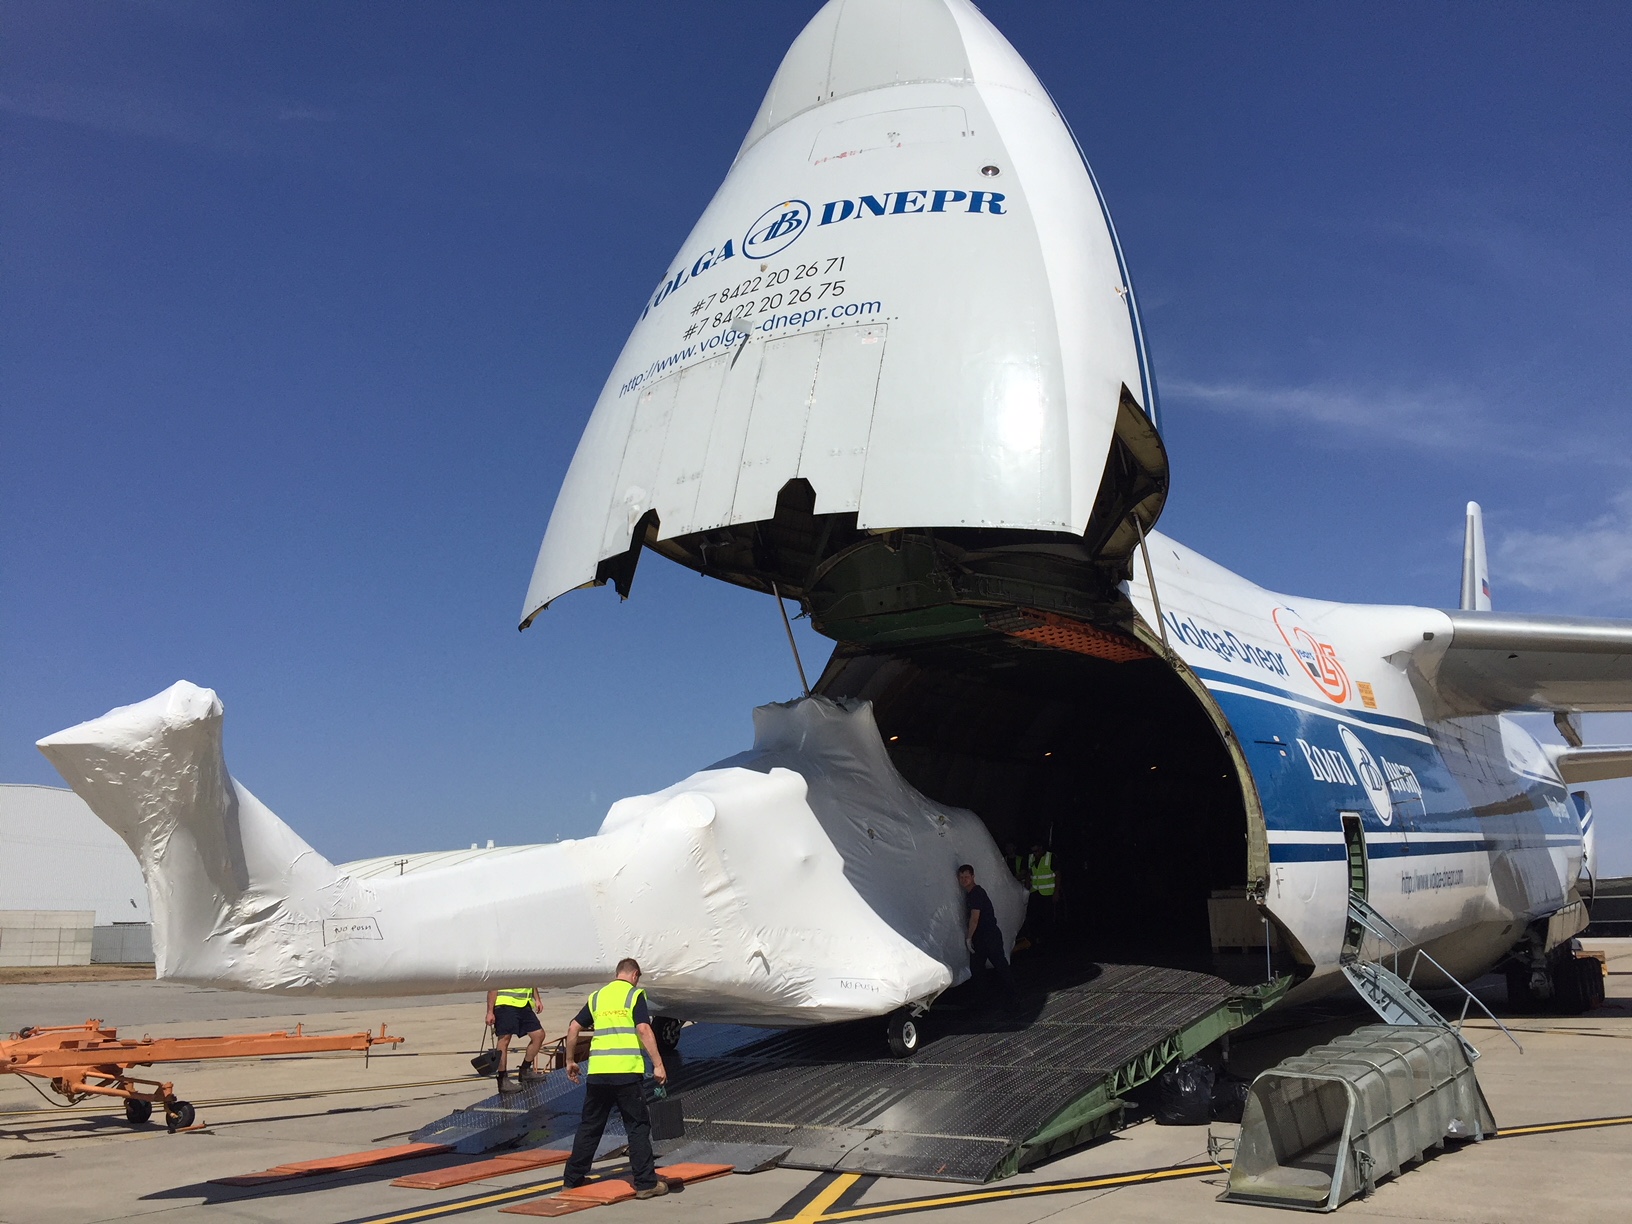 The Antonov 124 transported two helicopters from the UK to Melbourne, and then brought two others back to the UK